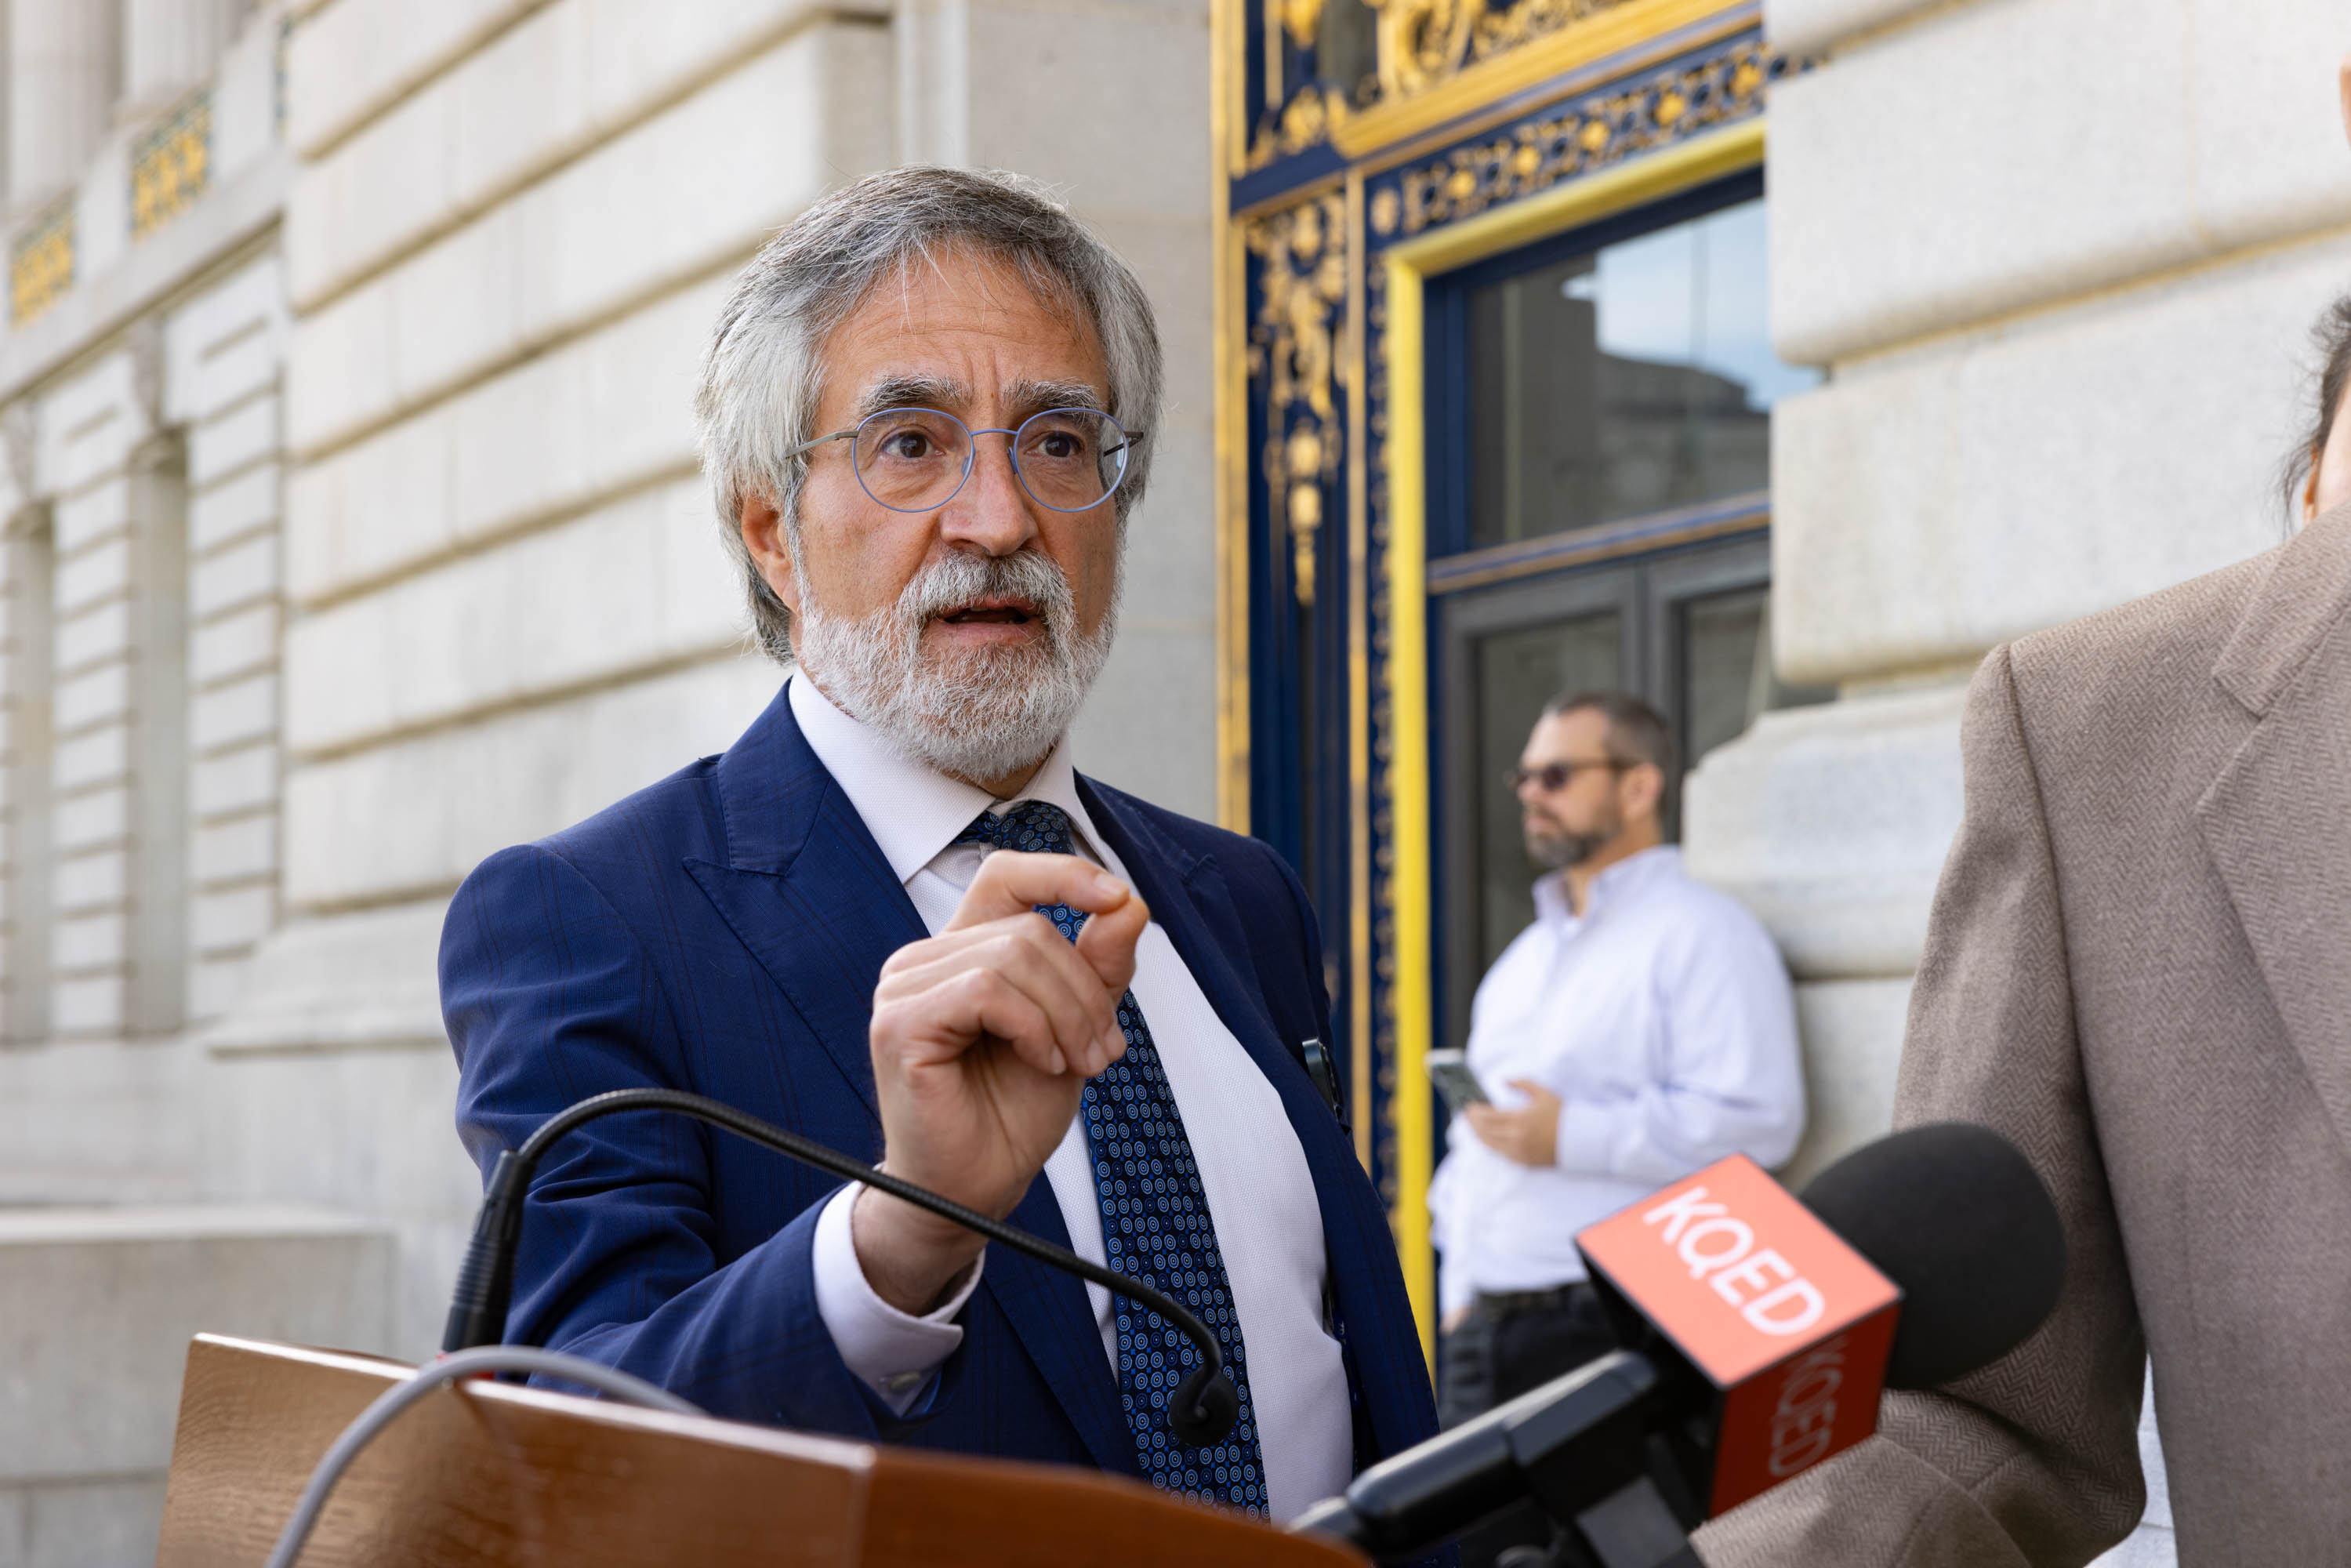 San Francisco Board of Supervisors President Aaron Peskin, in a blue jacket, answers a reporter's question outside city hall in San Francisco.